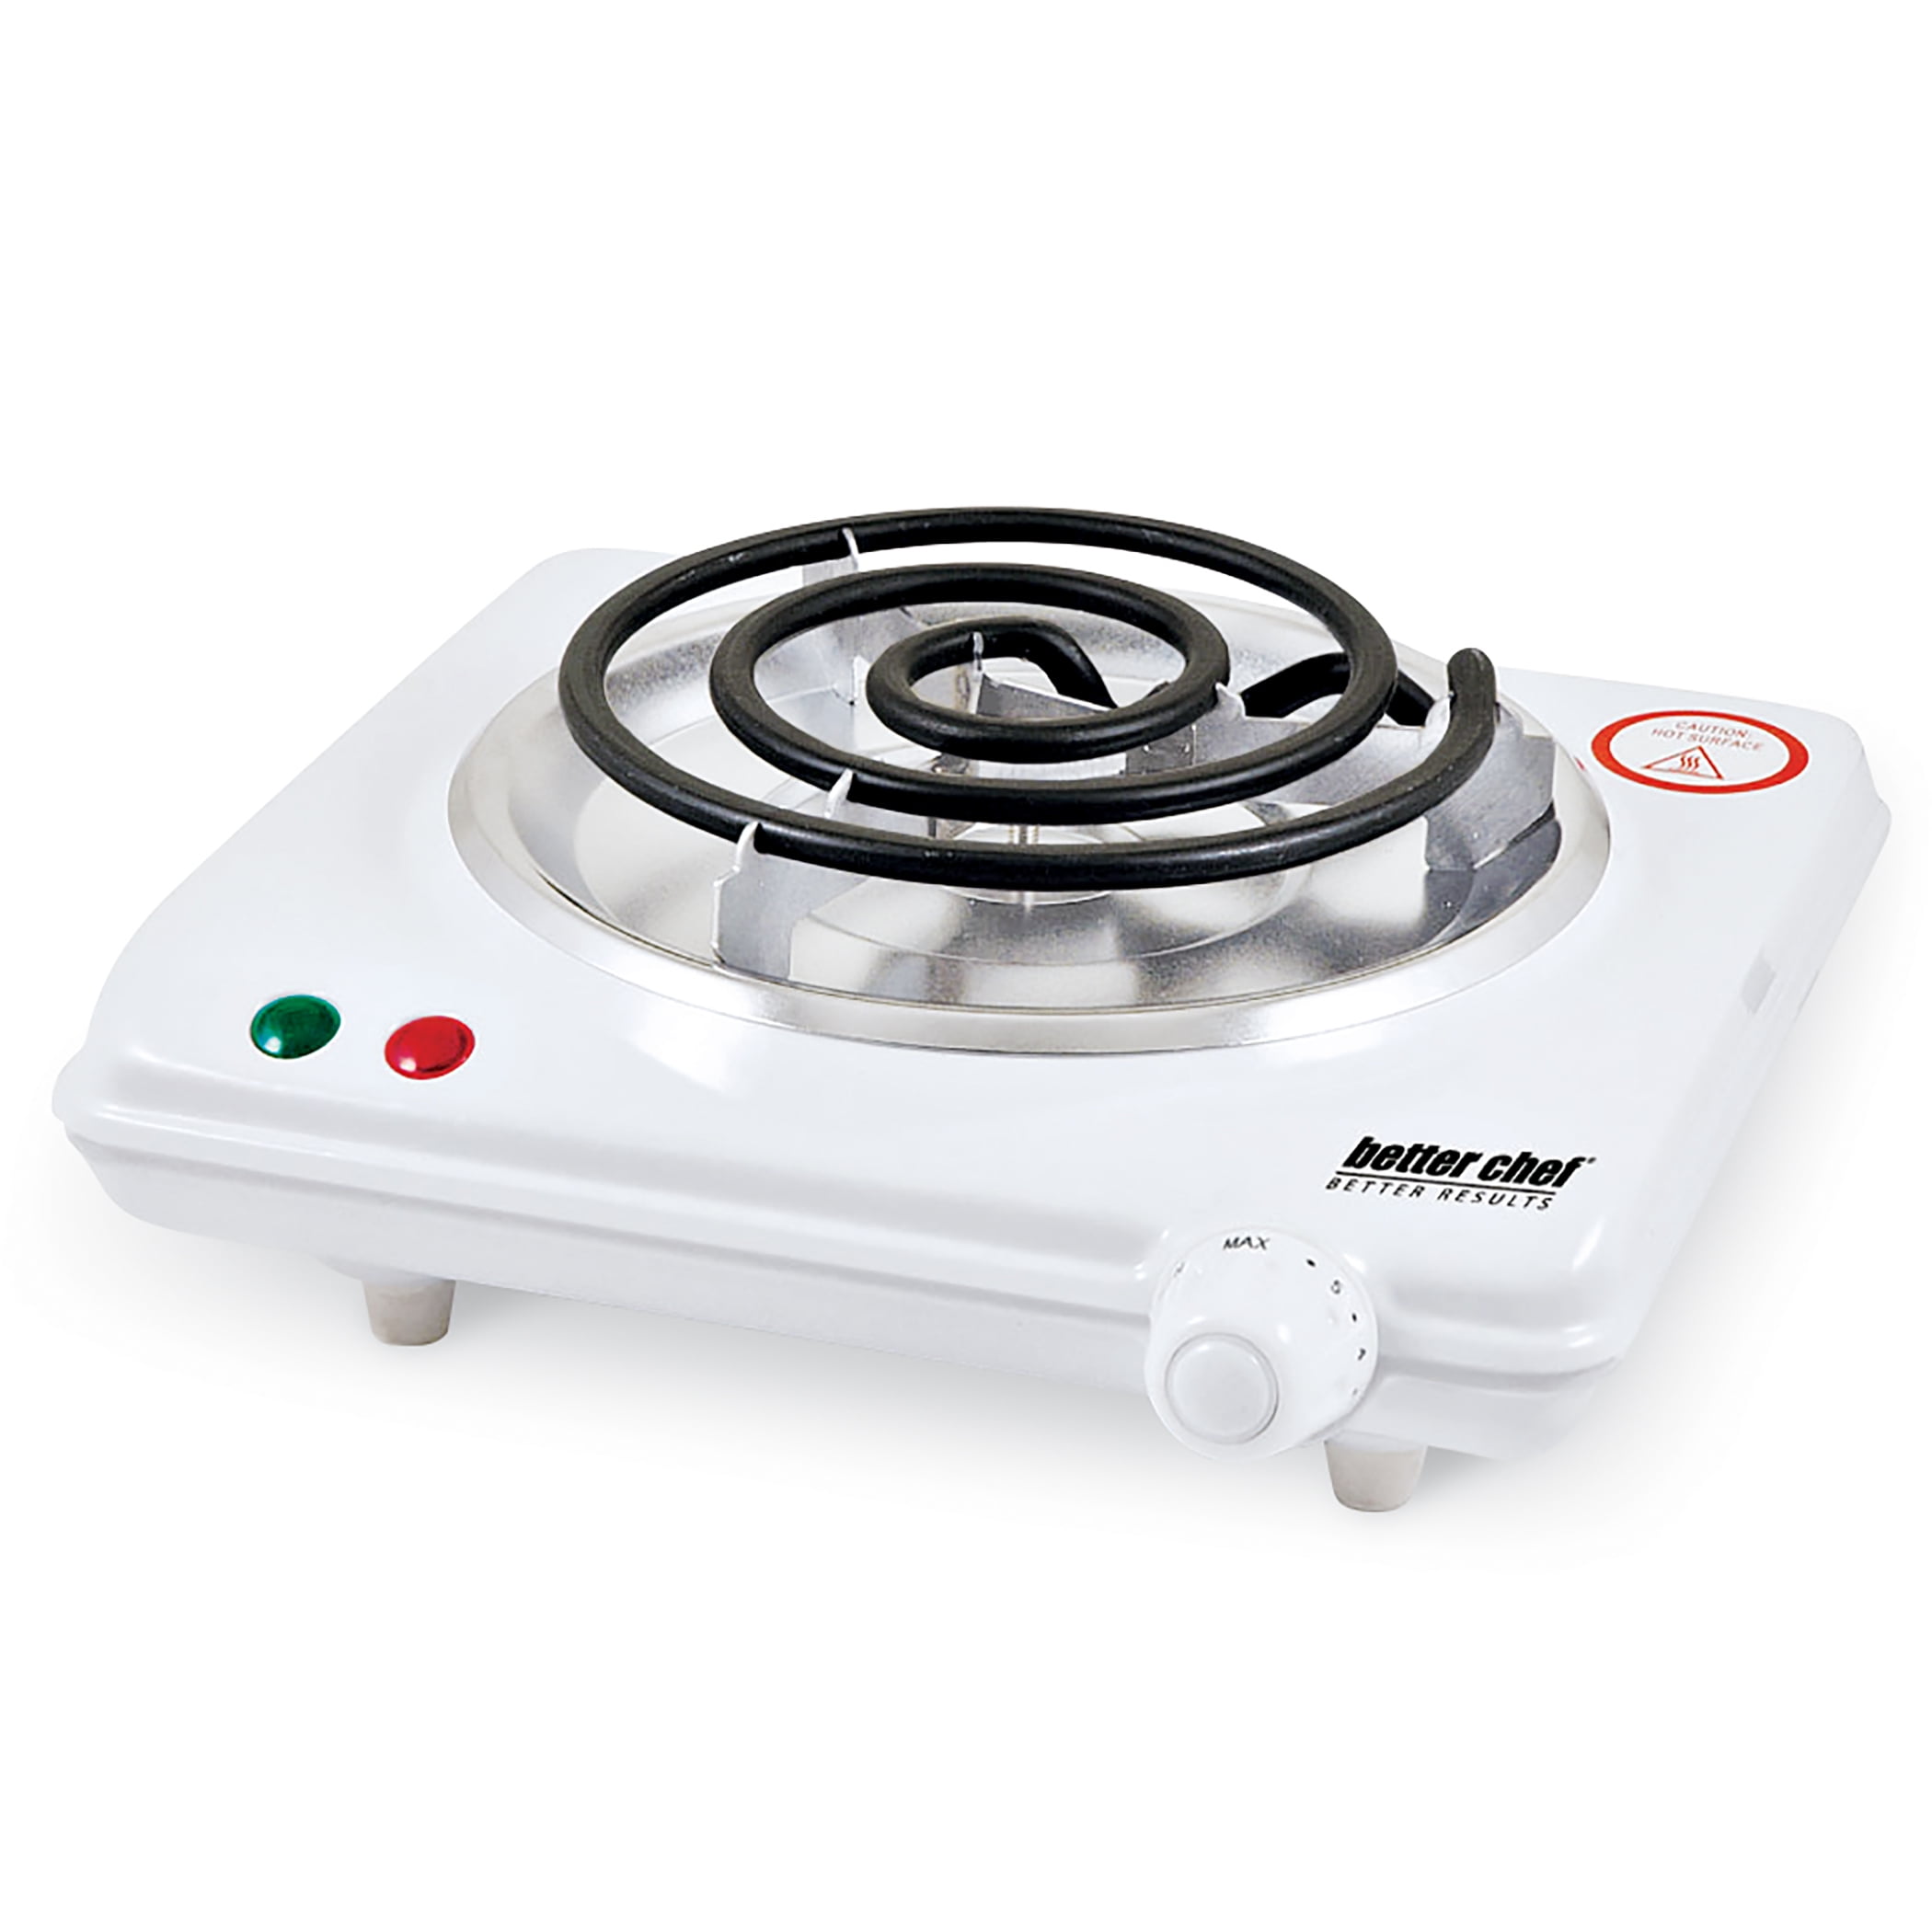 Buy Homesmart Electric Single Burner 1000W Hot Plate with 5 Level  Temperature Control and Overheat Protection- Black at ShopLC.